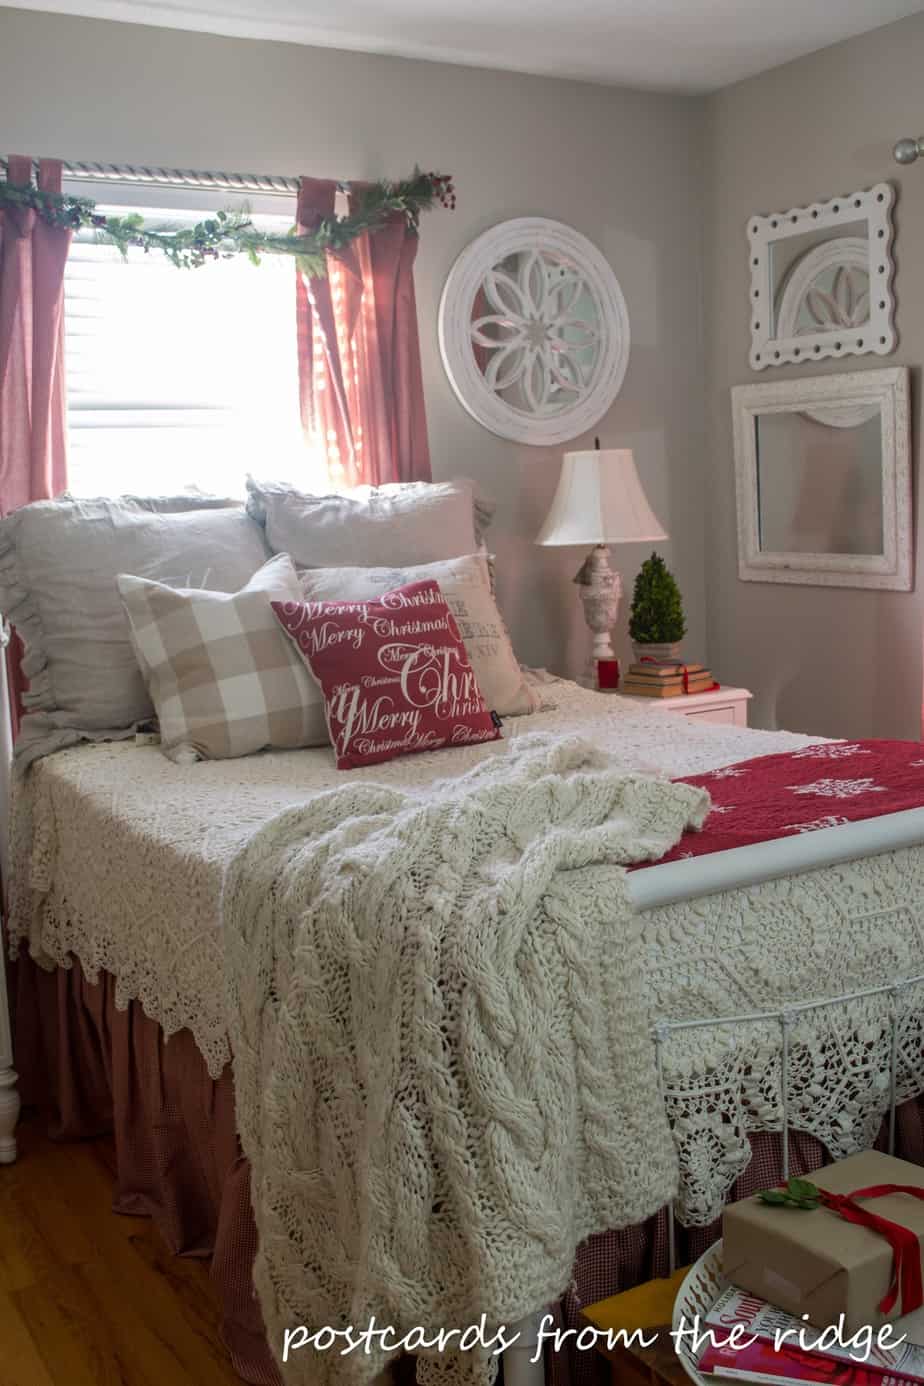 Love this cozy, cottage bedroom decorated for Christmas.